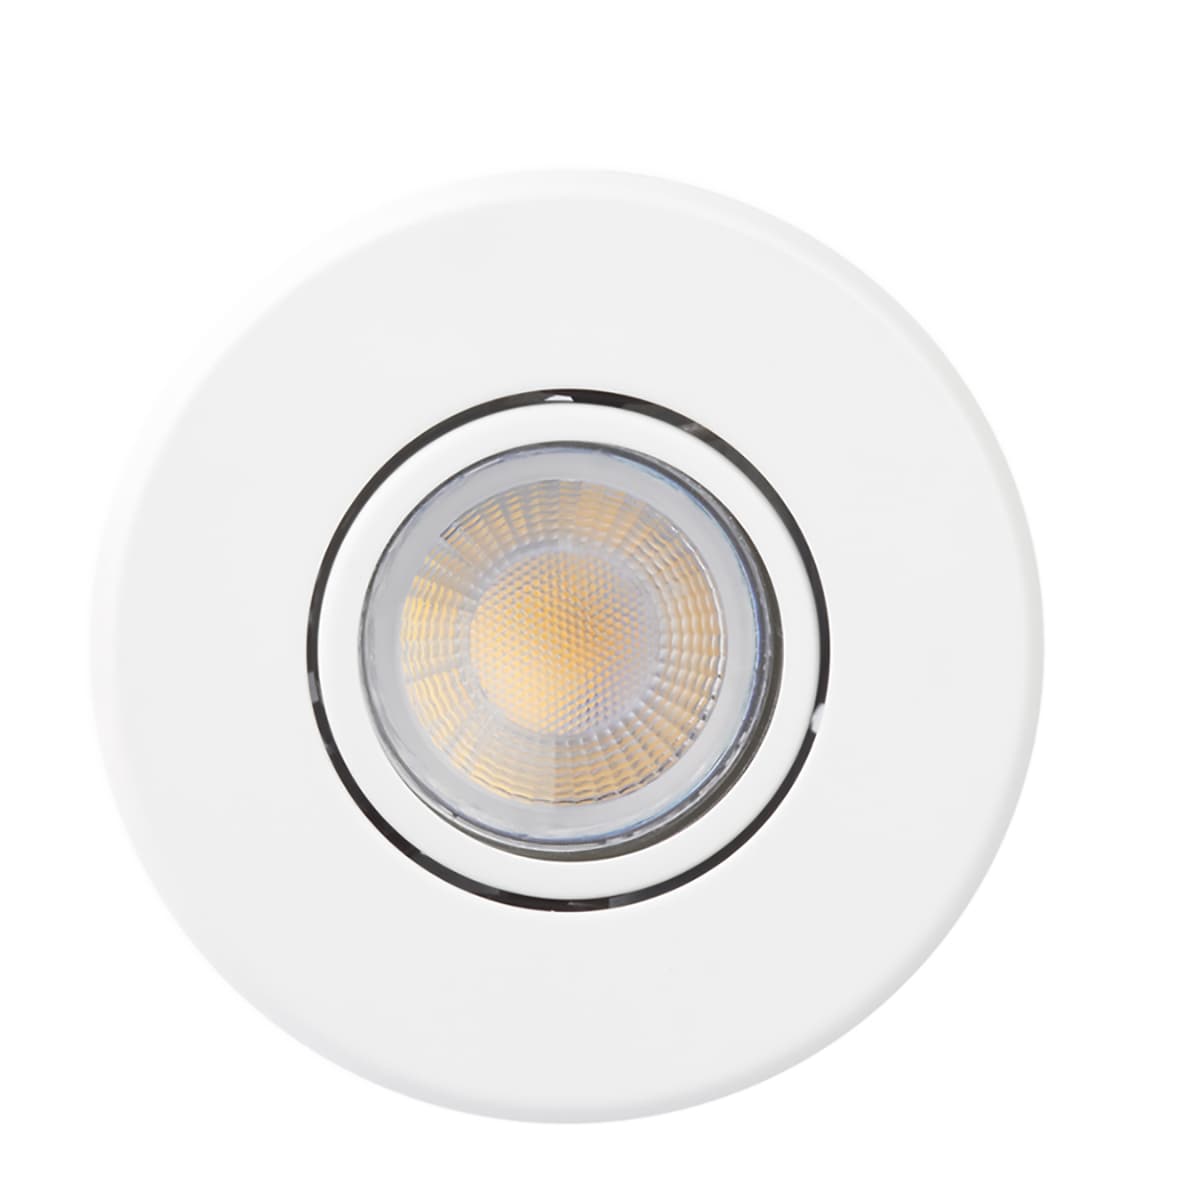 Globe Electric Recessed 3 In Halogen, Dimmable Led Recessed Lighting Reviews